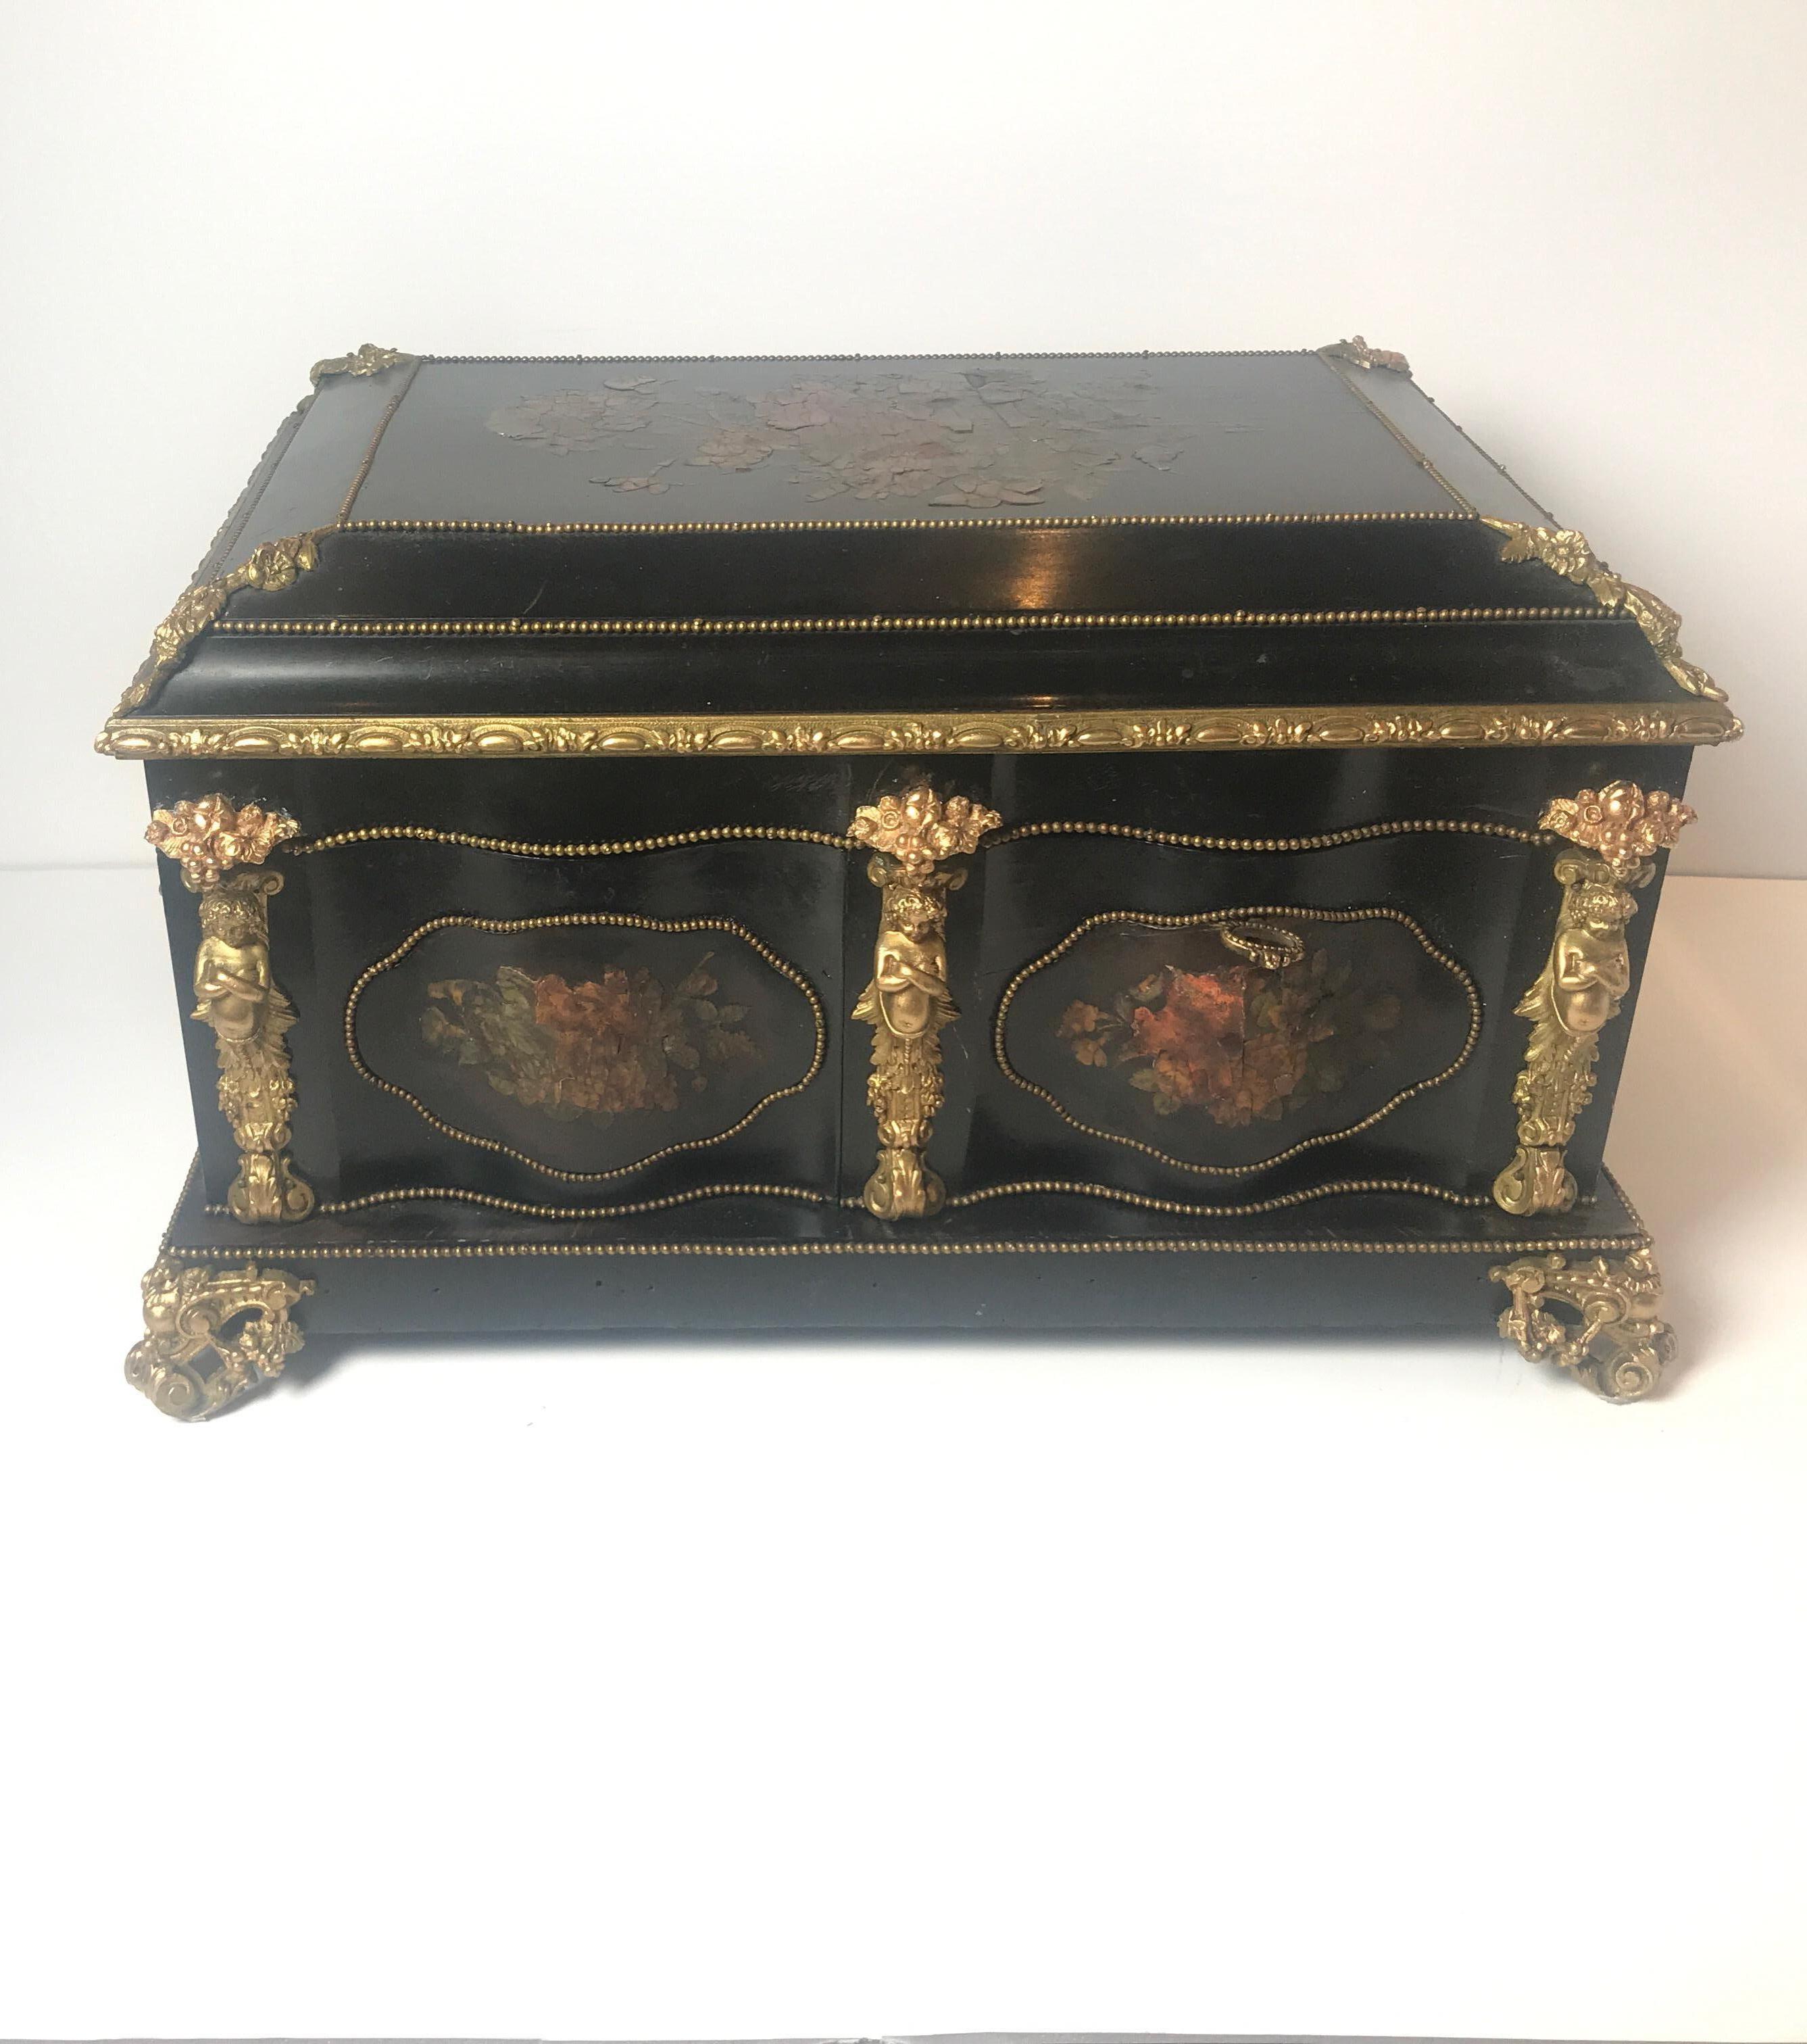 An extensively filled 19th century ormolu-mounted ebonized wood dresser vanity box fitted with silver gold washed lidded glass gars and sewing tools. The hallmarks appear to be French. The interior with mirror and original well cared for red velvet